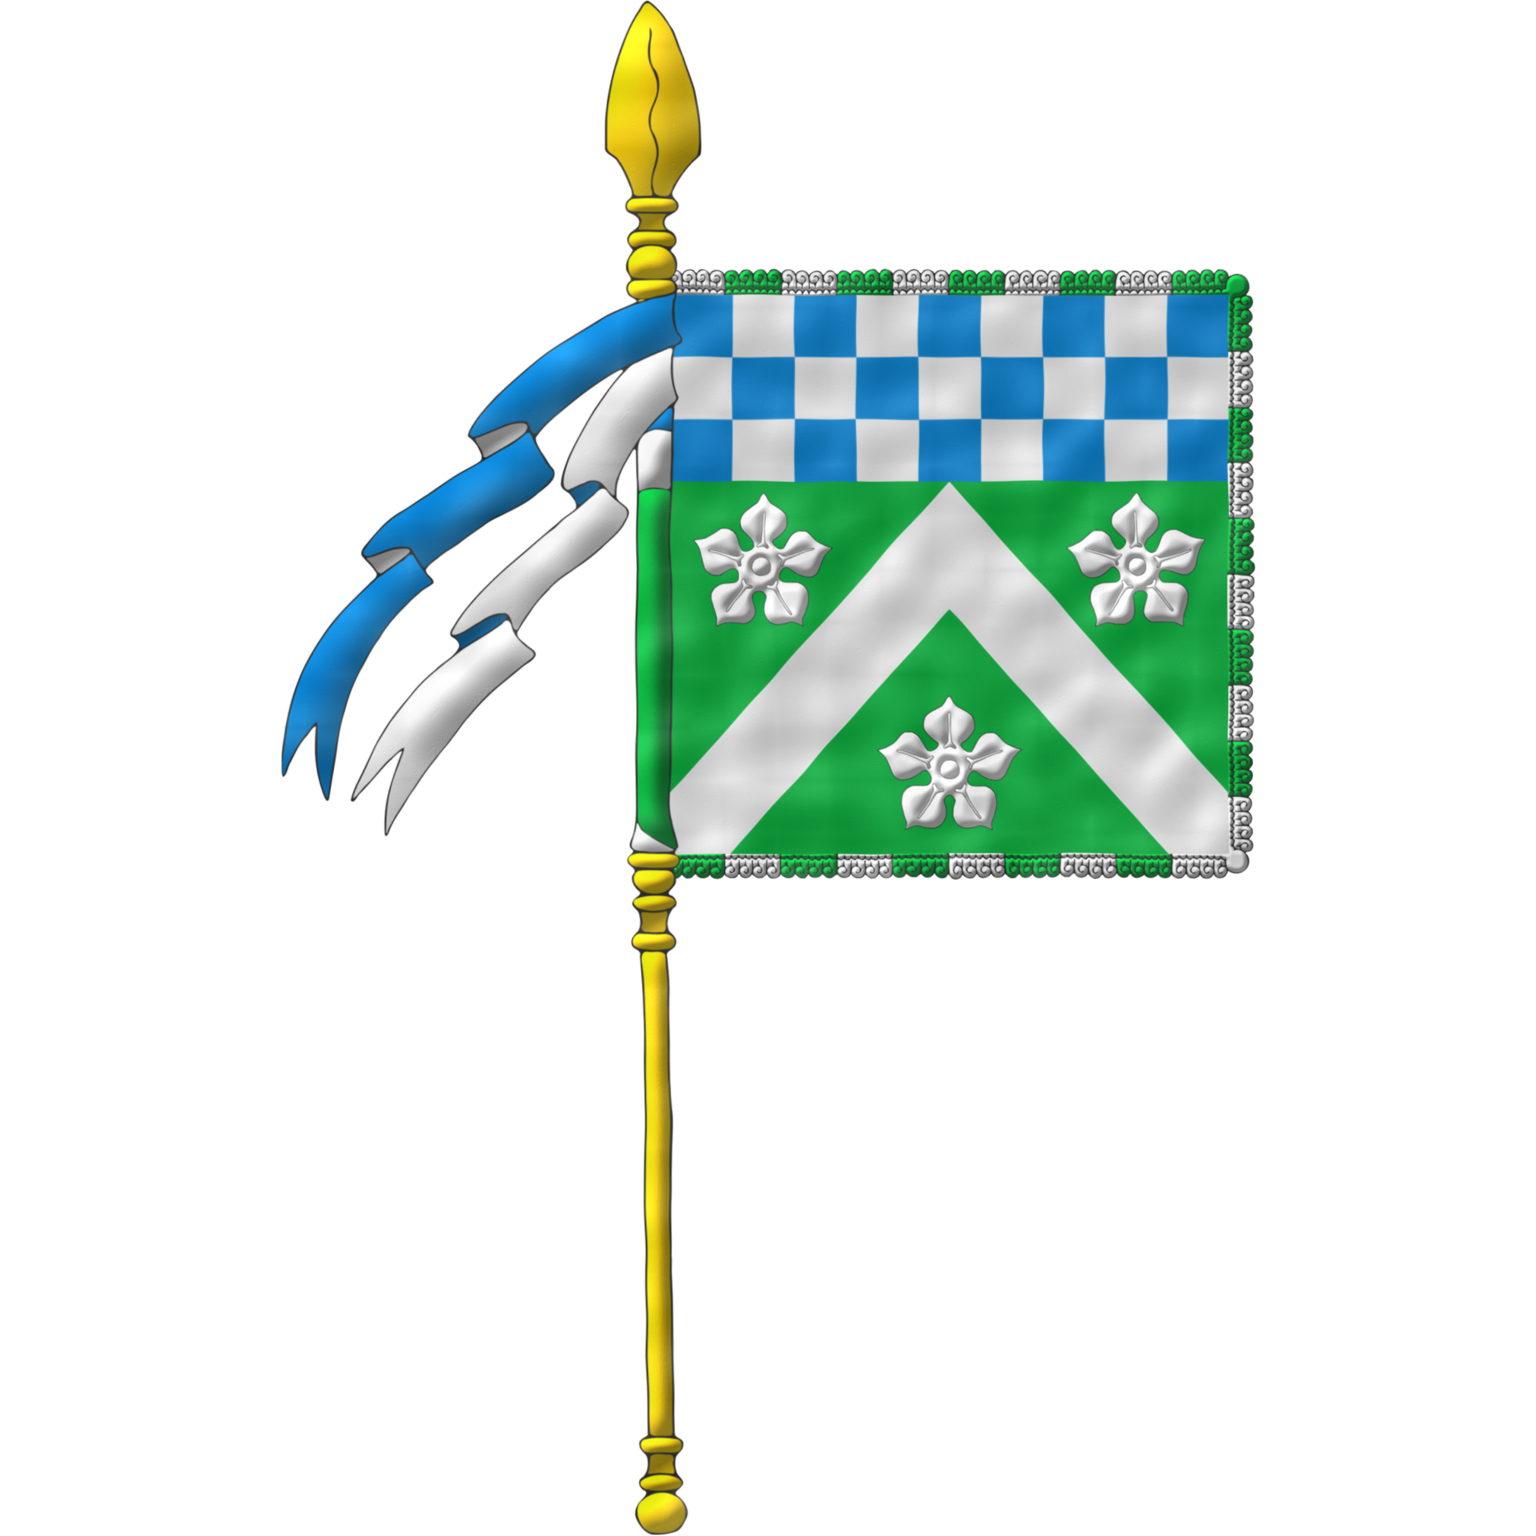 The banner of arms of Rhys Lochead emblazoned by me. Blazon: Vert, a chevron between three cinquefoils Argent; a chief chequey Azure and Argent.